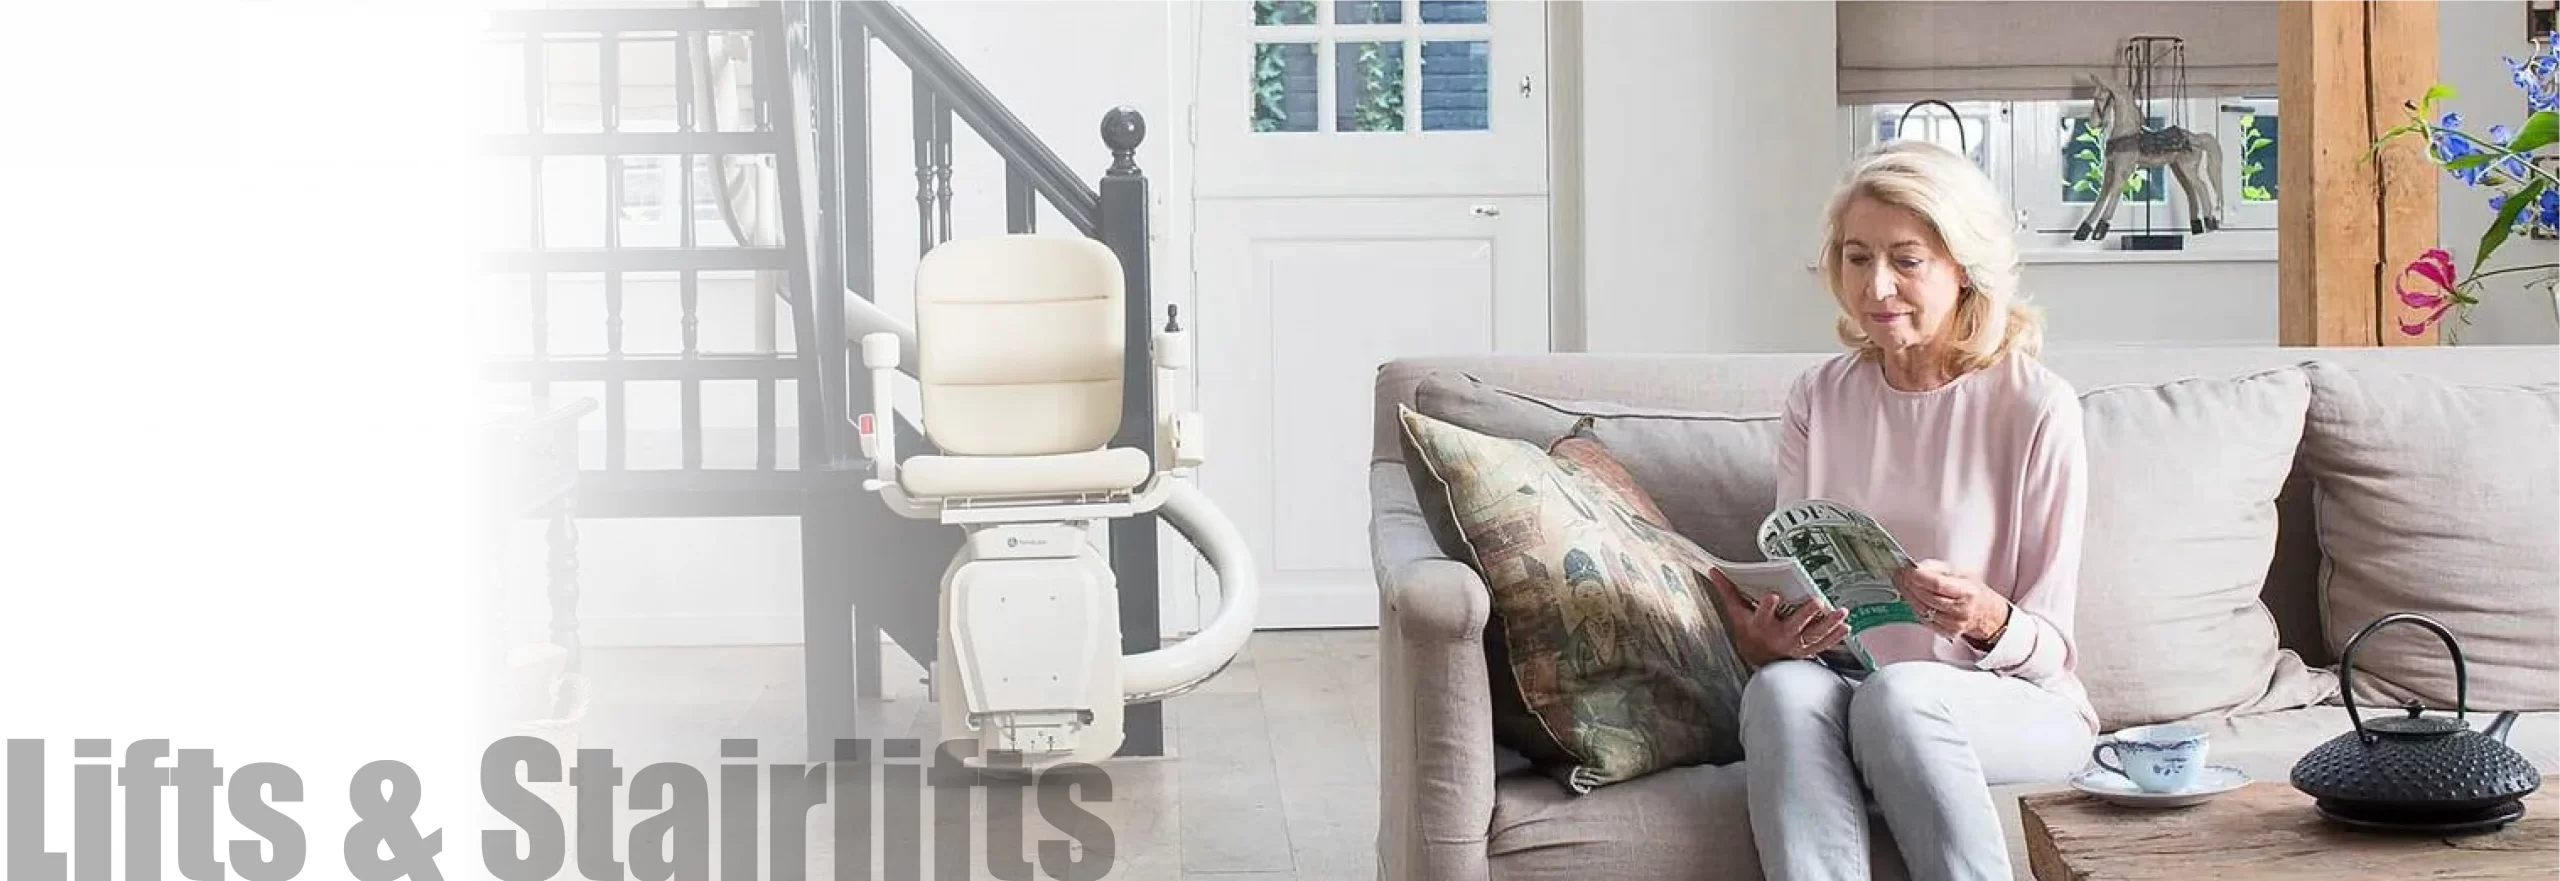 Stairlifts & Lifts